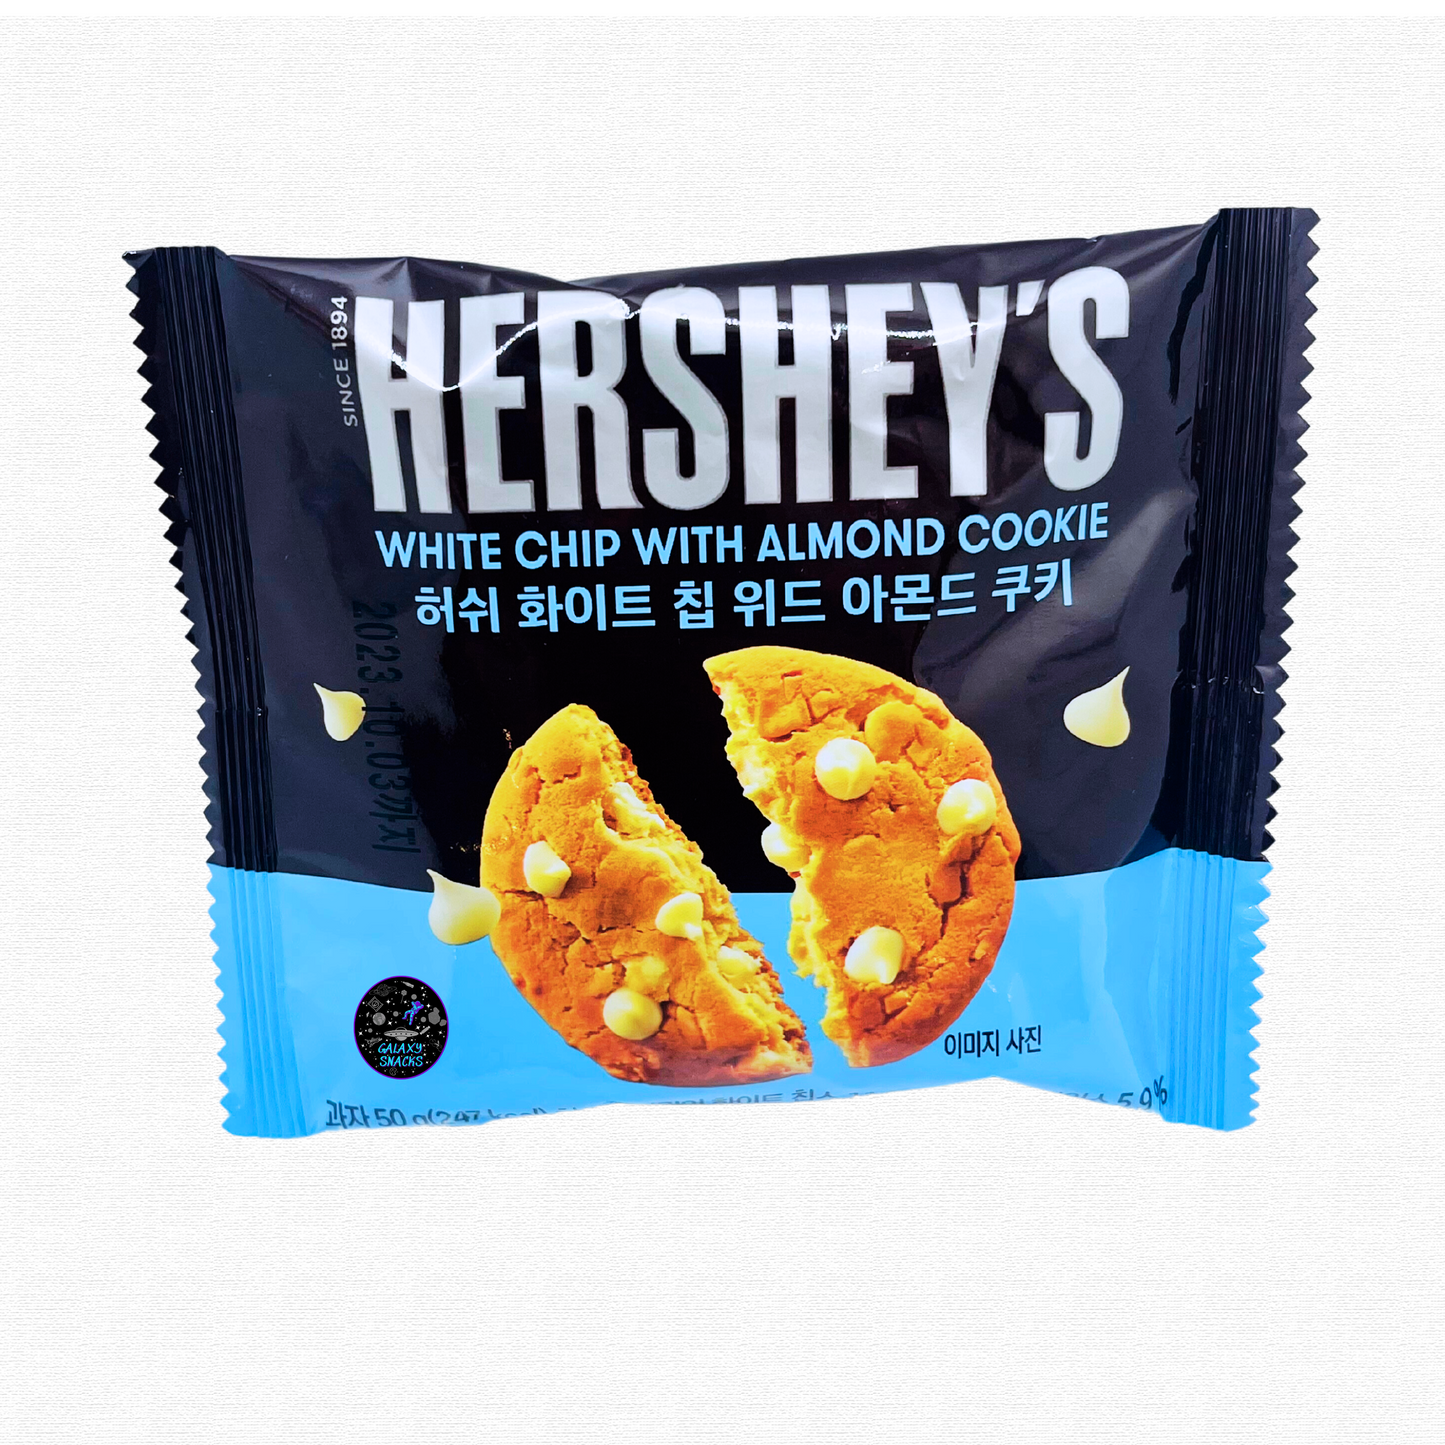 Hershey’s White Chip With Almond Cookie (Korea)